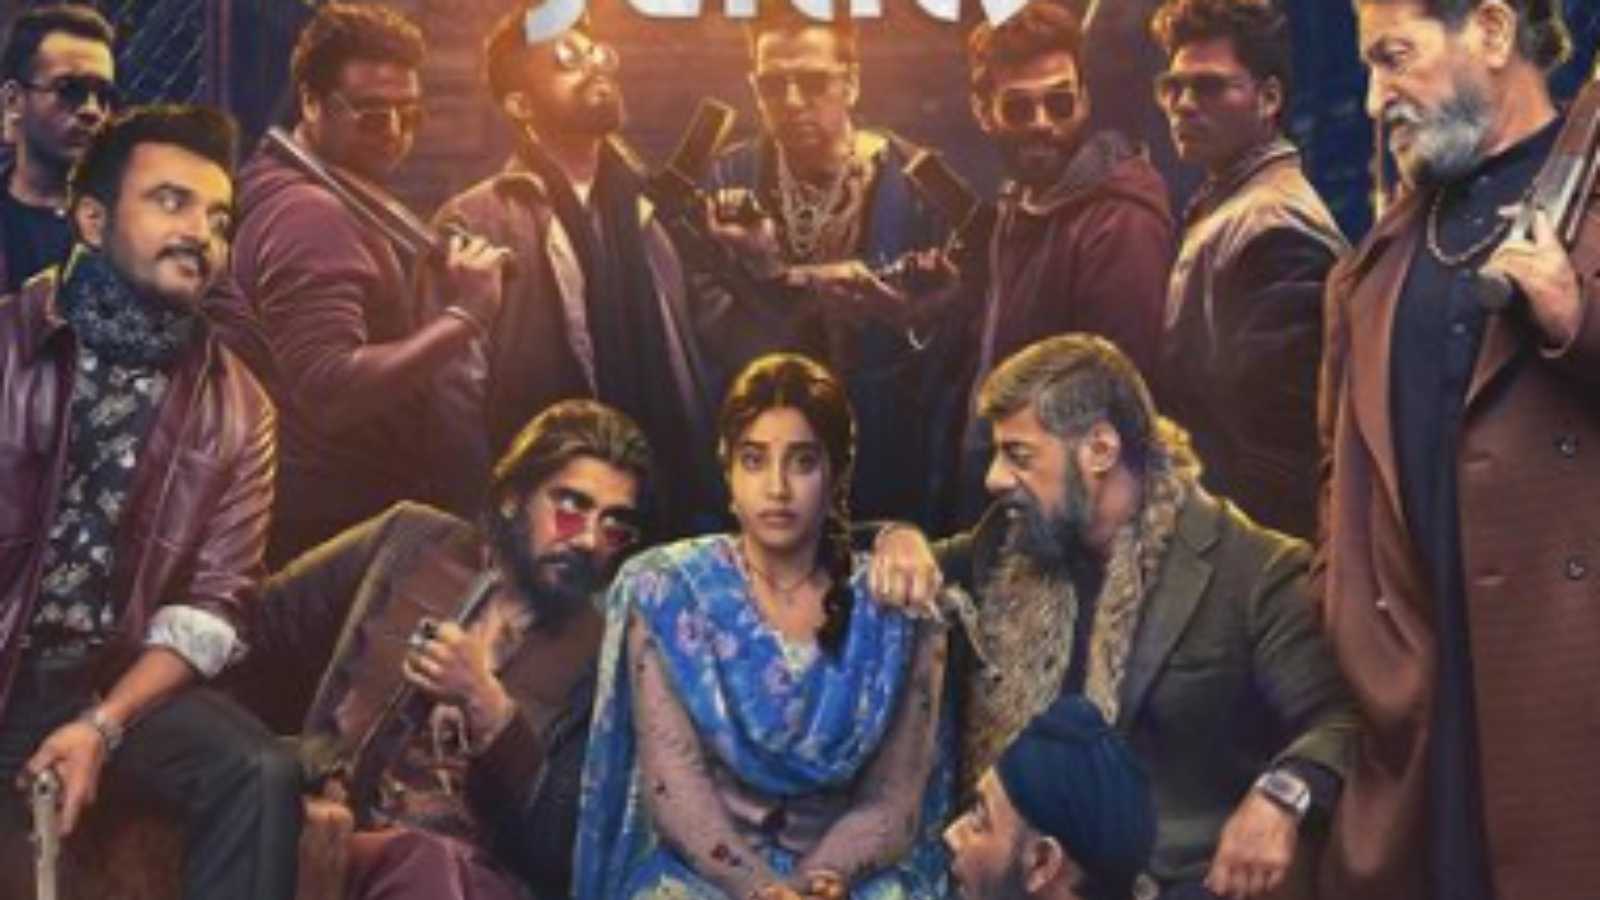 Goodluck Jerry Movie Review: Janhvi Kapoor starrer etches out a balanced dark comedy minus the shoddy second half